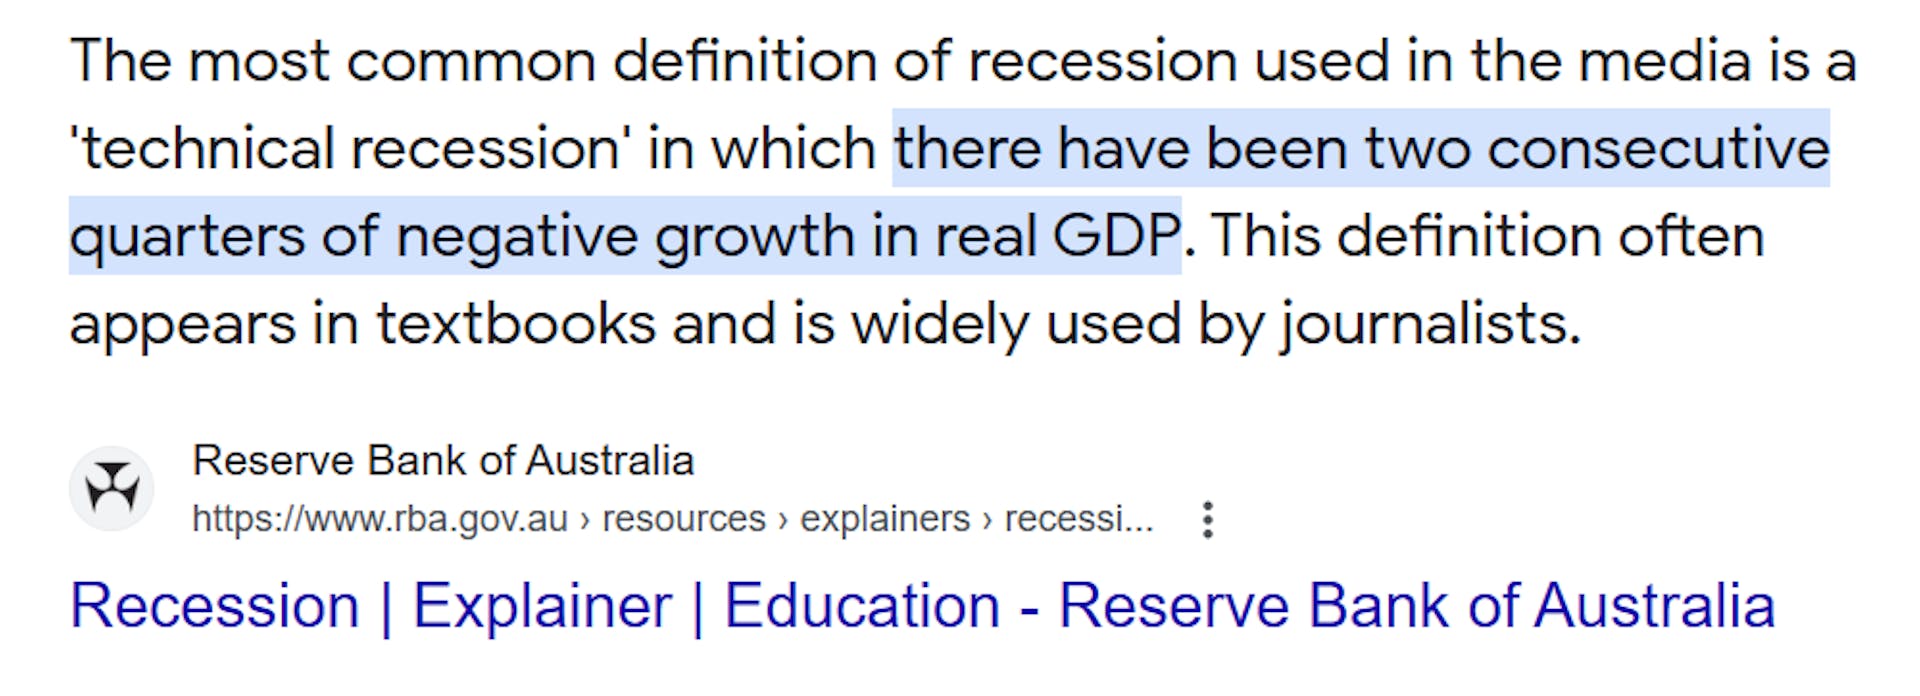 Definition of recession